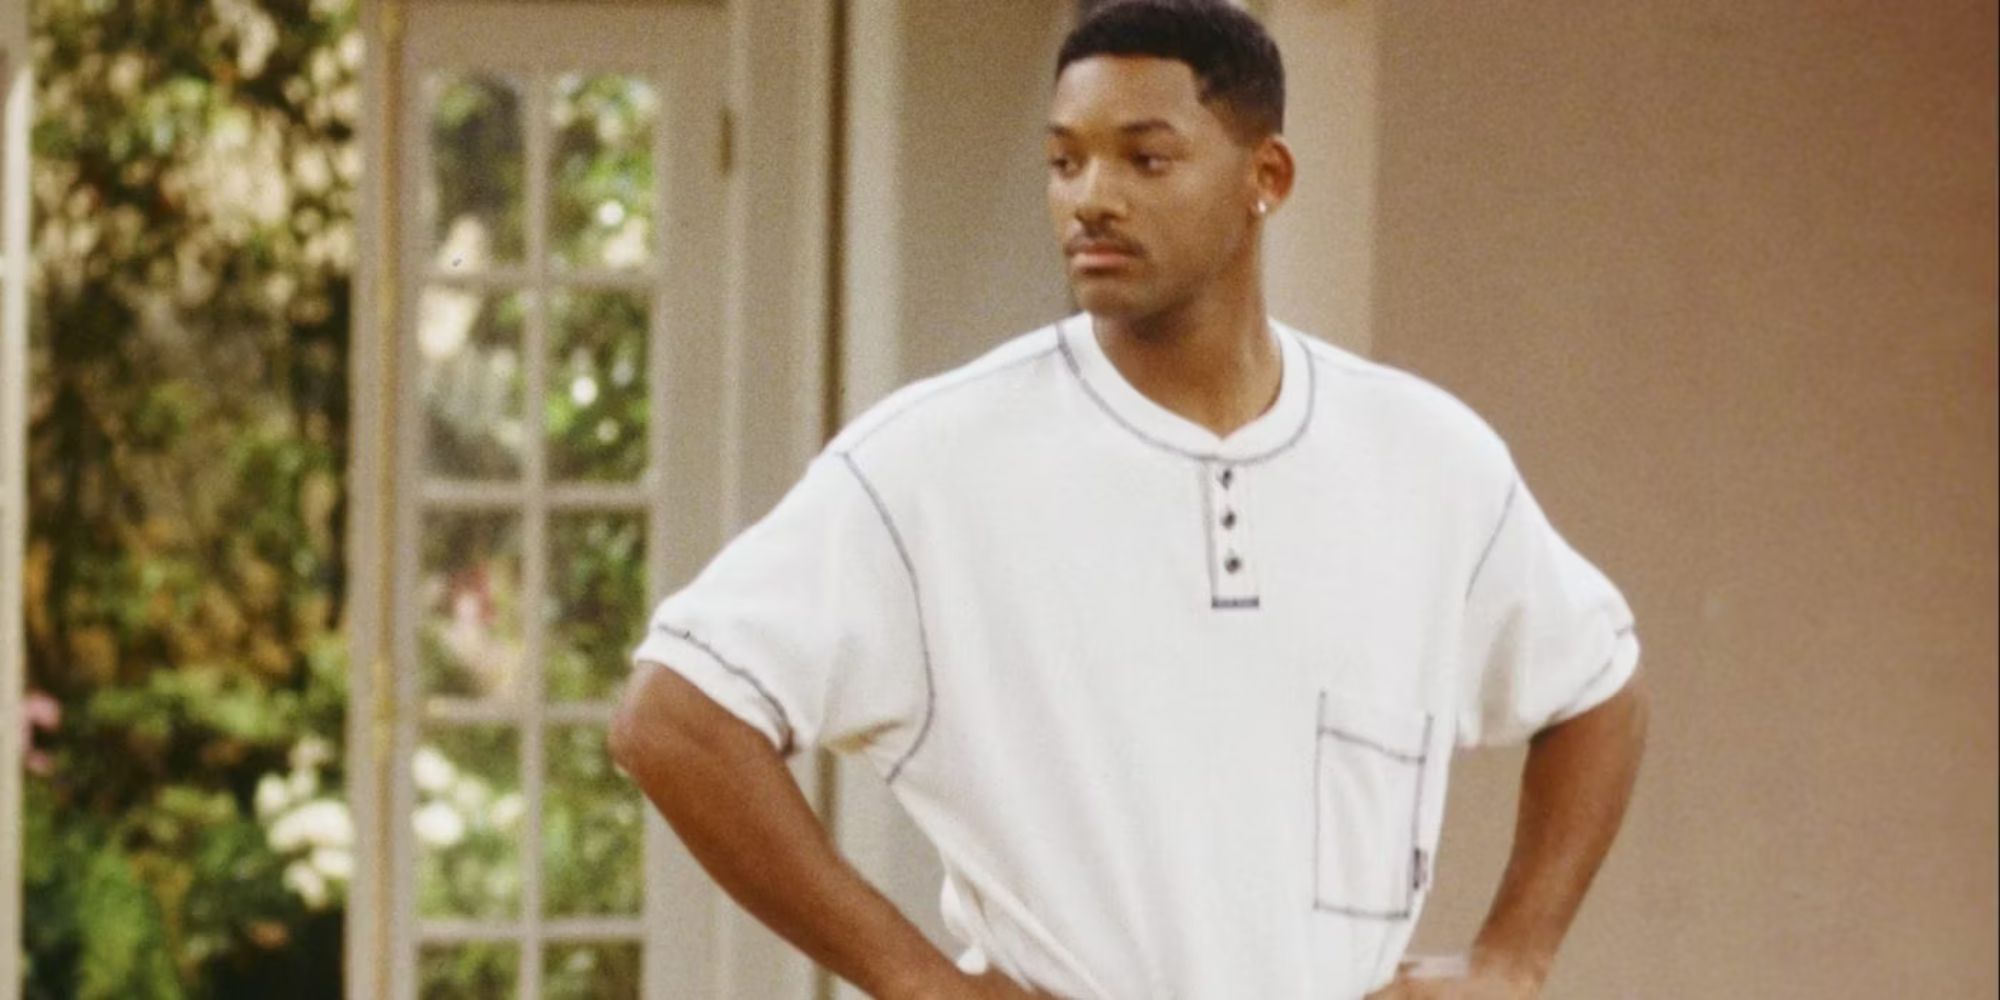 Will Smith as Will stands alone in a scene from The Fresh Prince of Bel-Air.